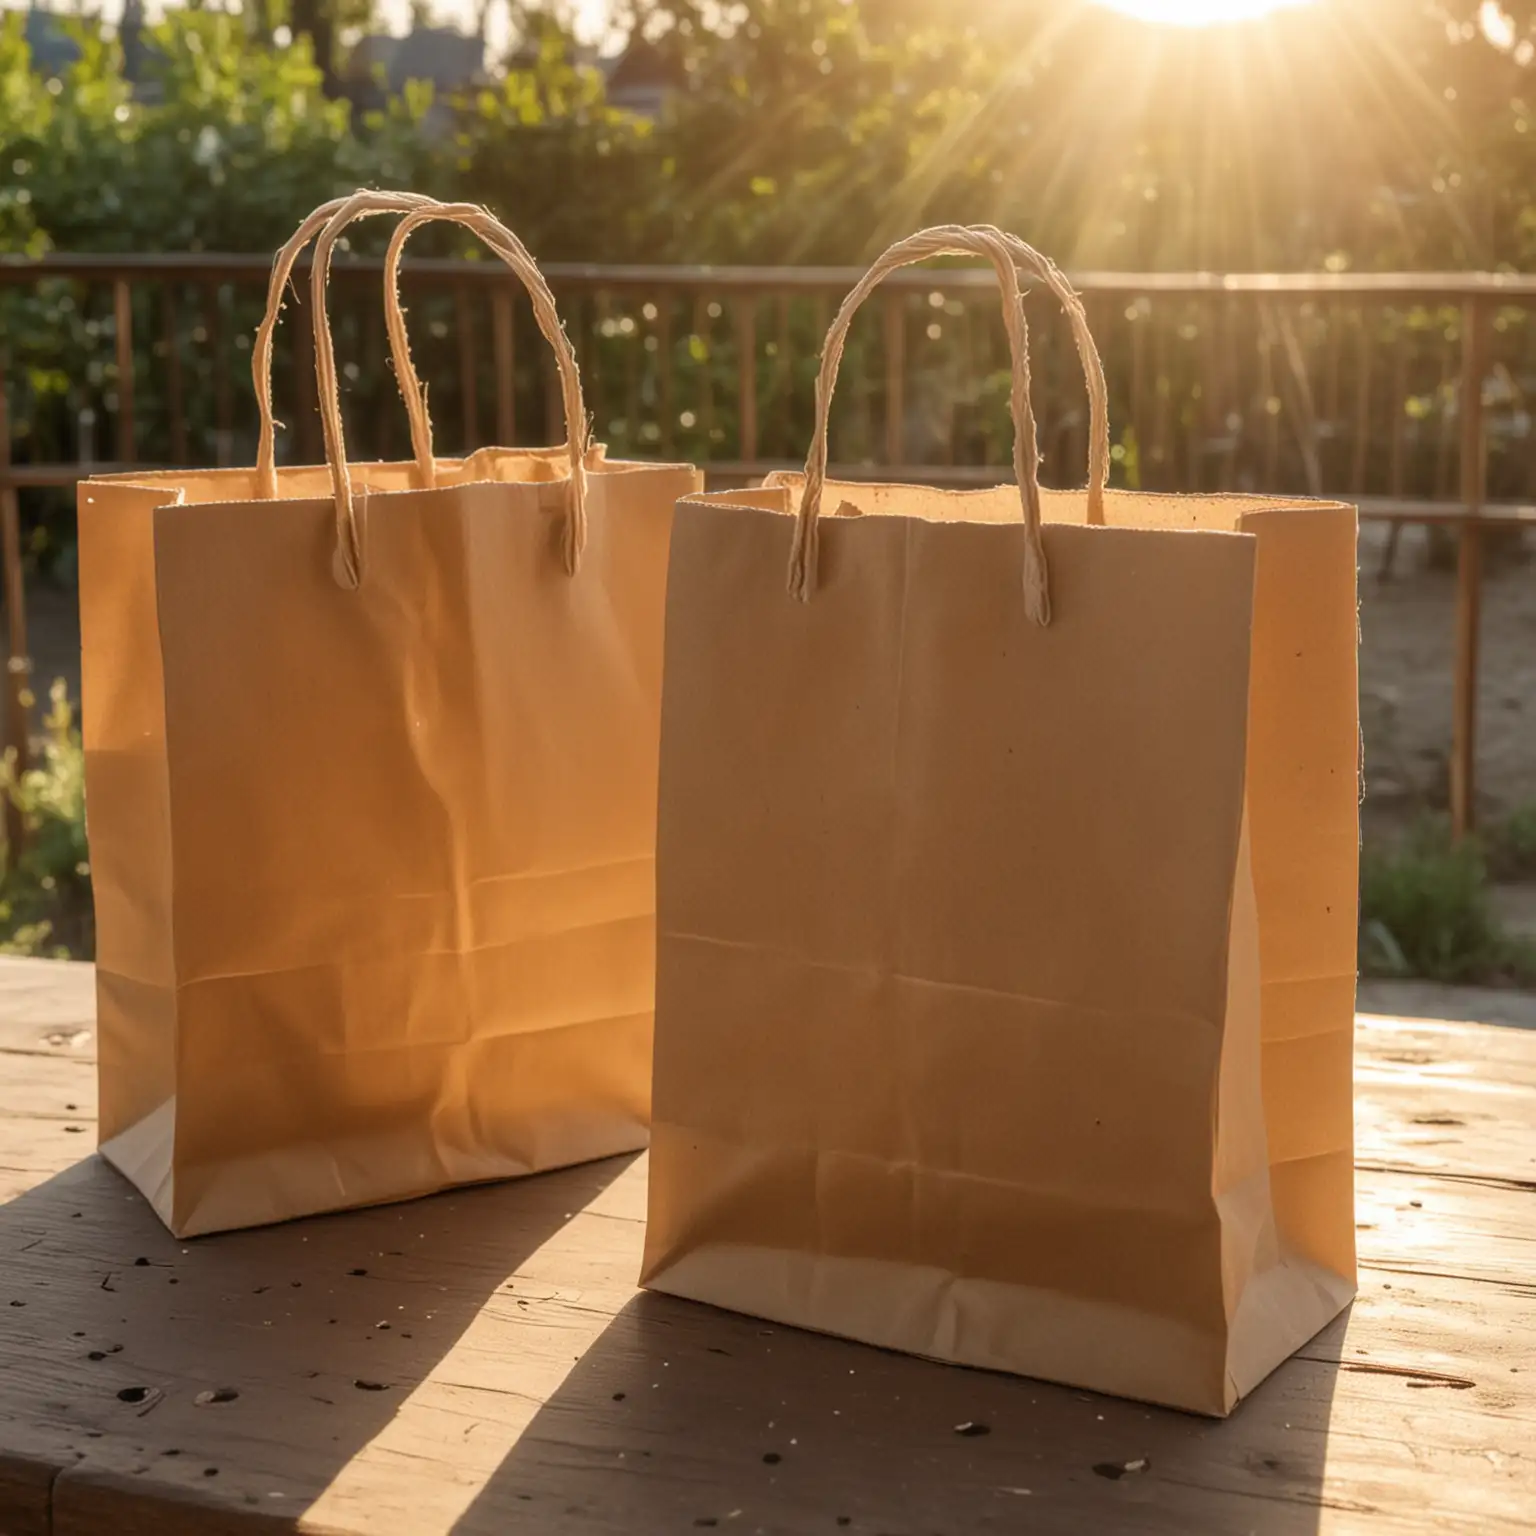 Craft-Paper-Bags-with-Paper-Pens-in-Sunlight